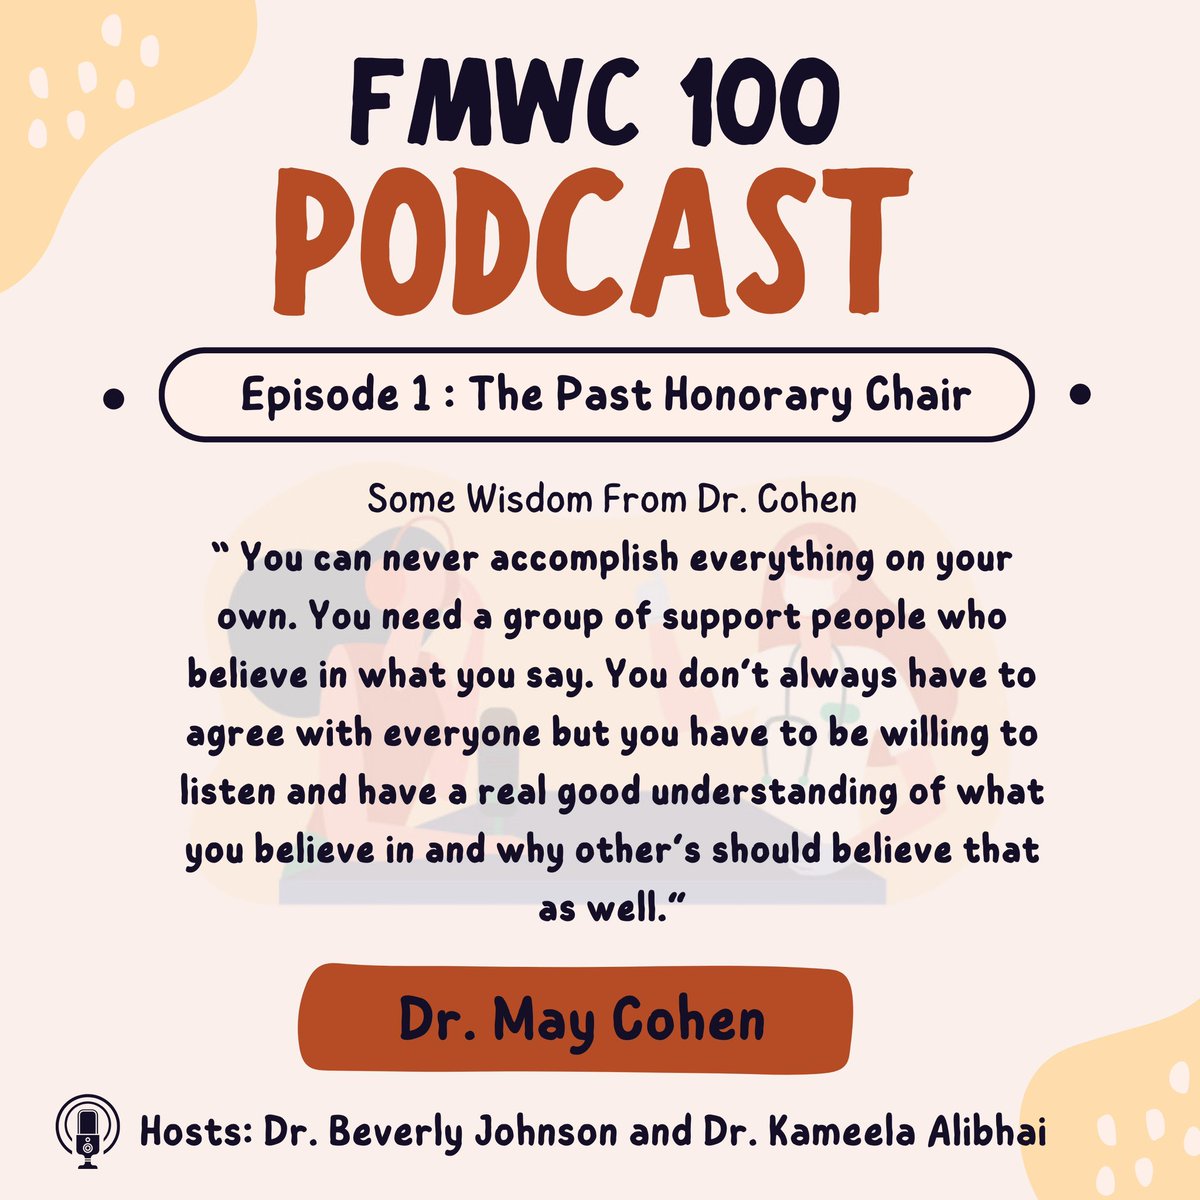 If you haven’t had the chance to listen to our first, FMWC 100 podcast featuring the past honorary chair, Dr. May Cohen, here is some wisdom she shared with us during the episode. Our podcast is available on Spotify and Apple Podcasts! #FMWC #FMWC100